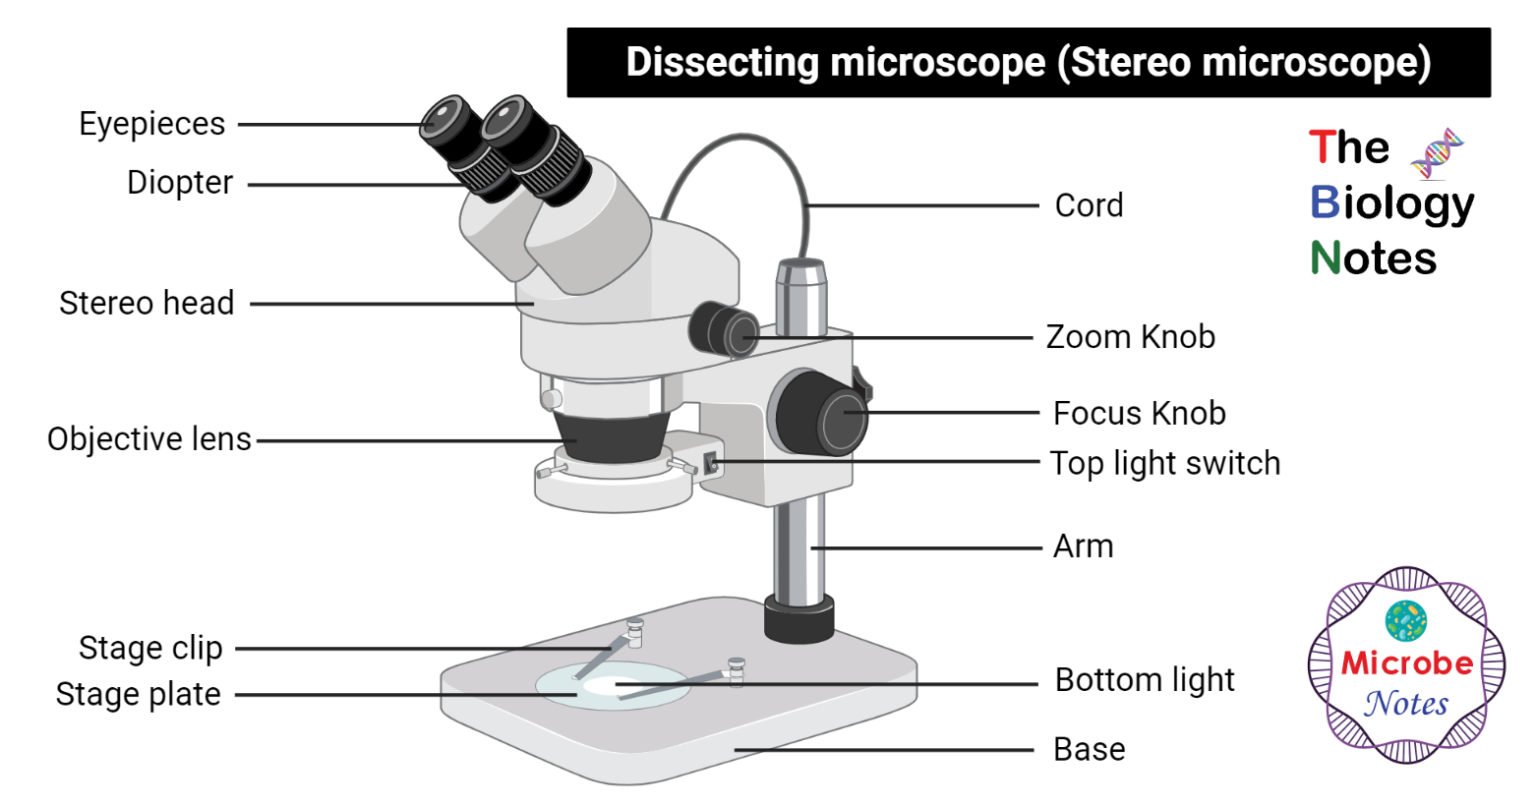 Dissecting Microscope Stereo Or Stereoscopic Microscope- Definition Principle Parts